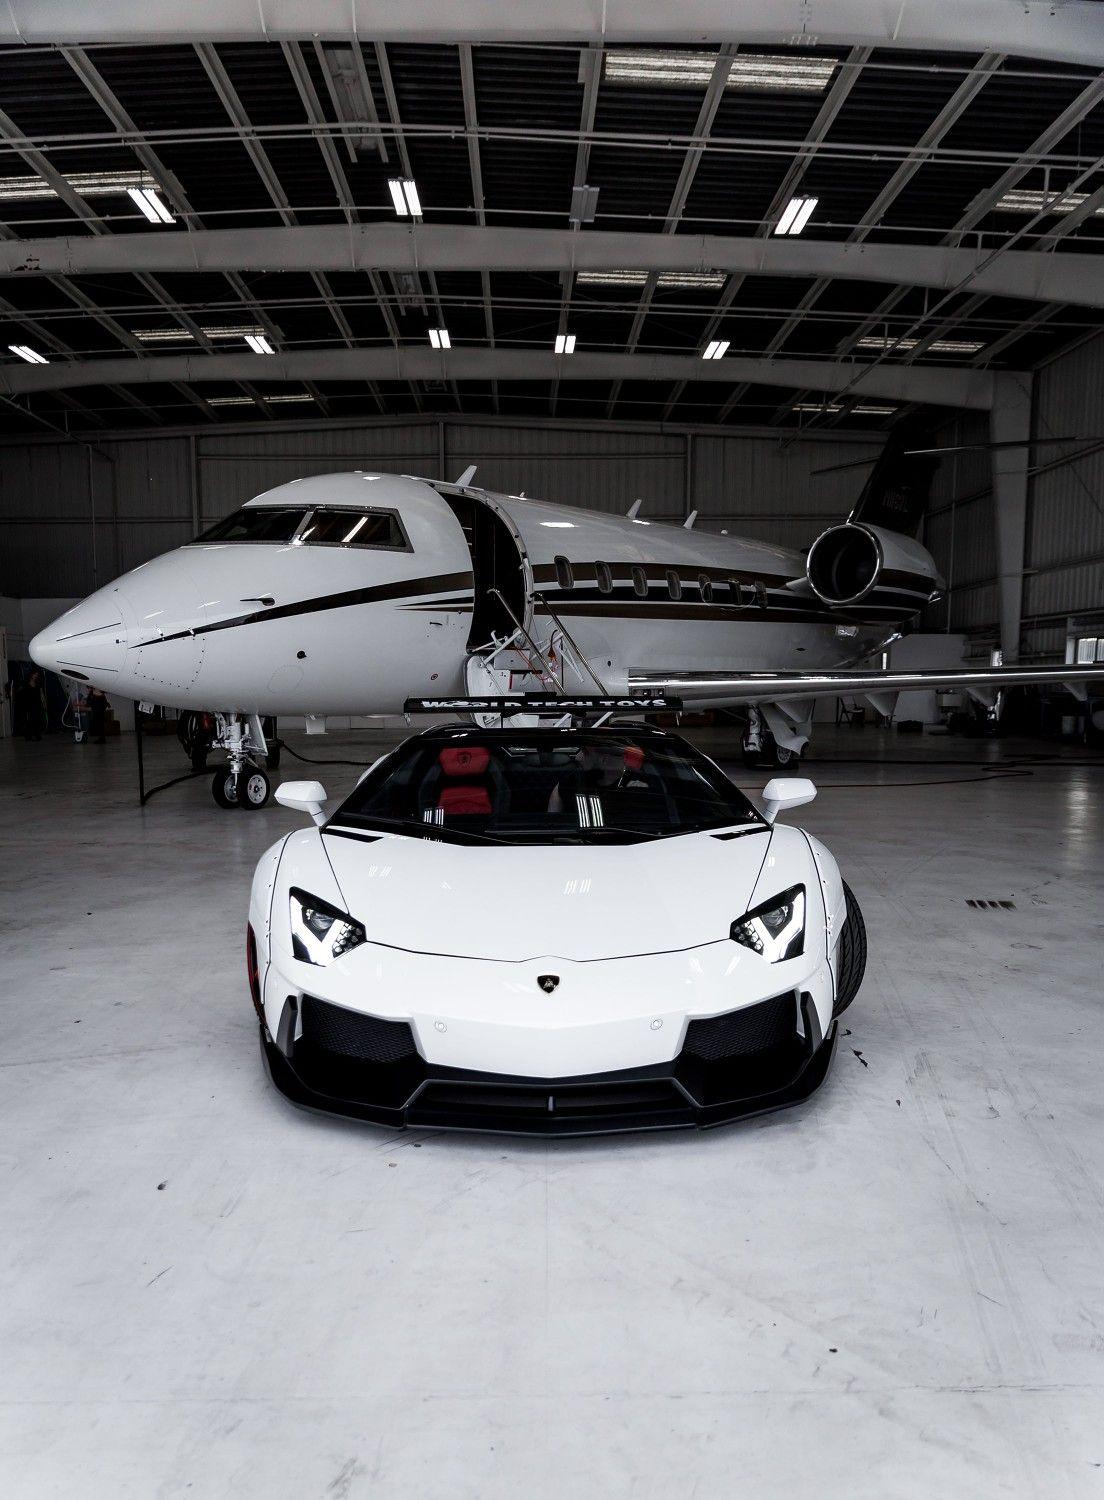 Lambo with private jet #wallpaper. android wallpaper, iphone